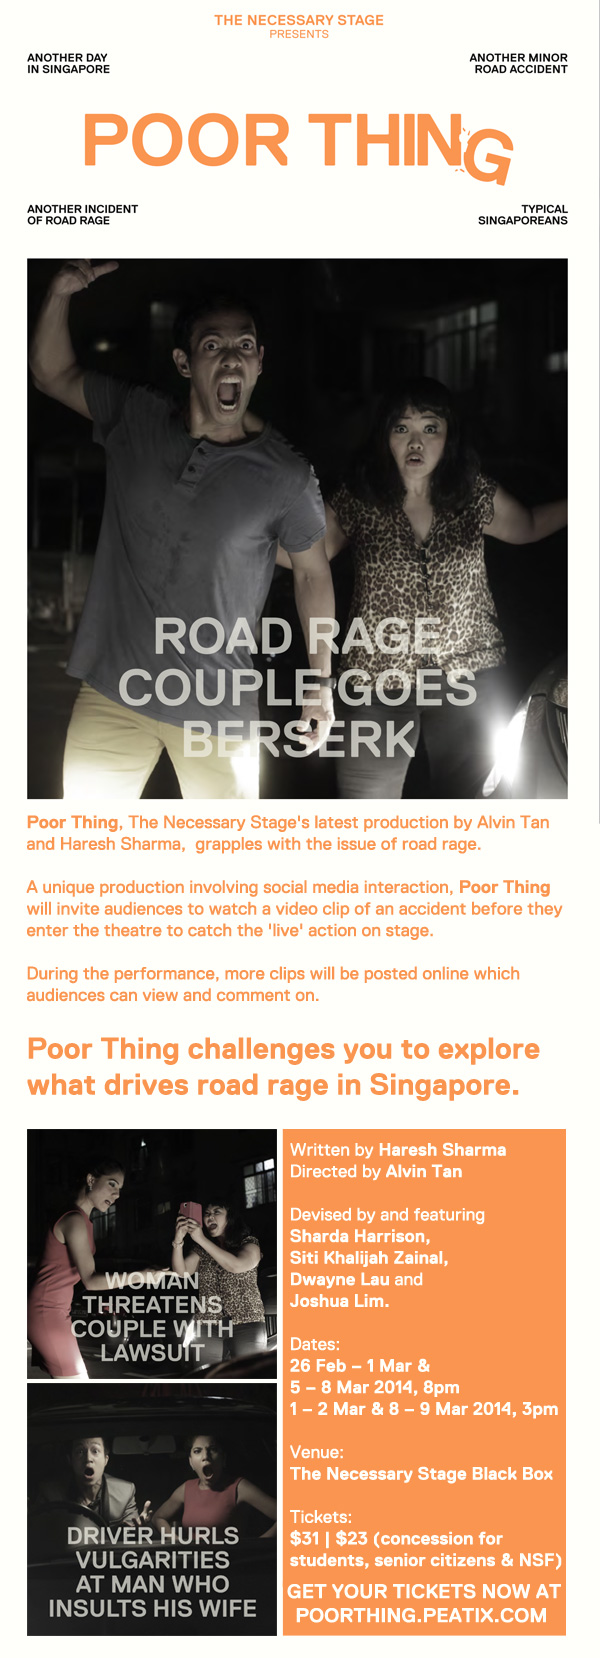 <ADV> The Necessary Stage's next production Poor Thing challenges you to explore what drives road rage in Singapore! 